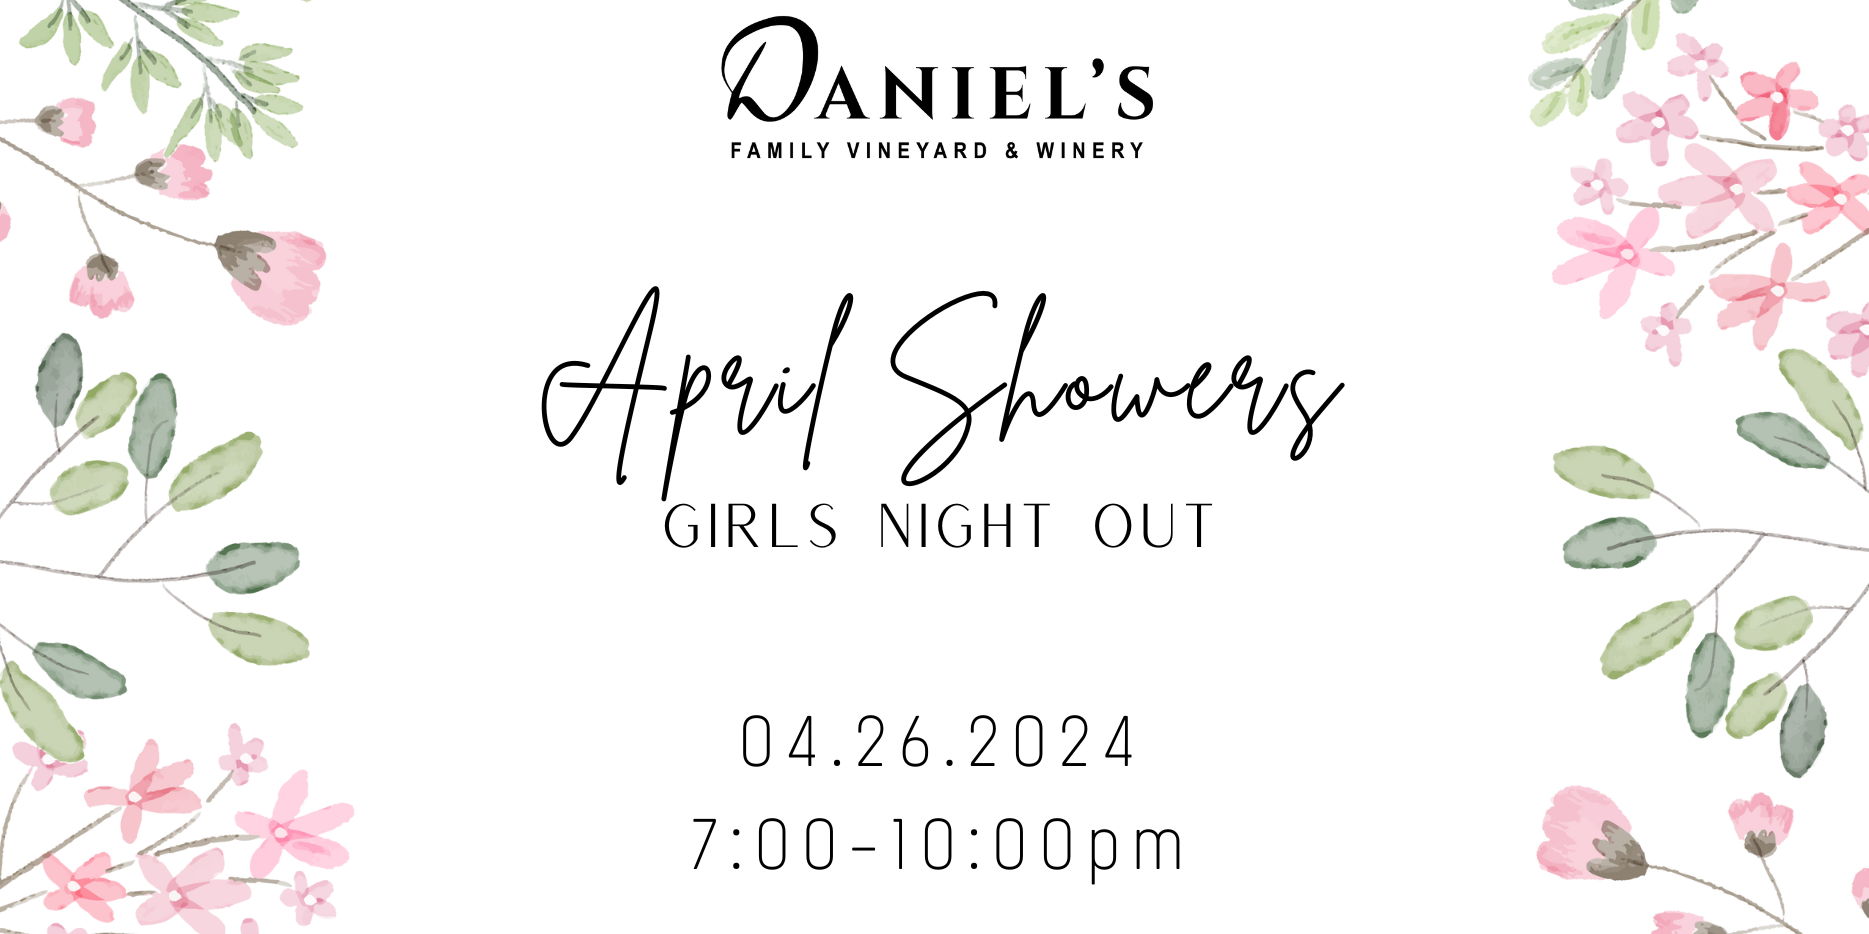 April Showers - Girls Night Out promotional image